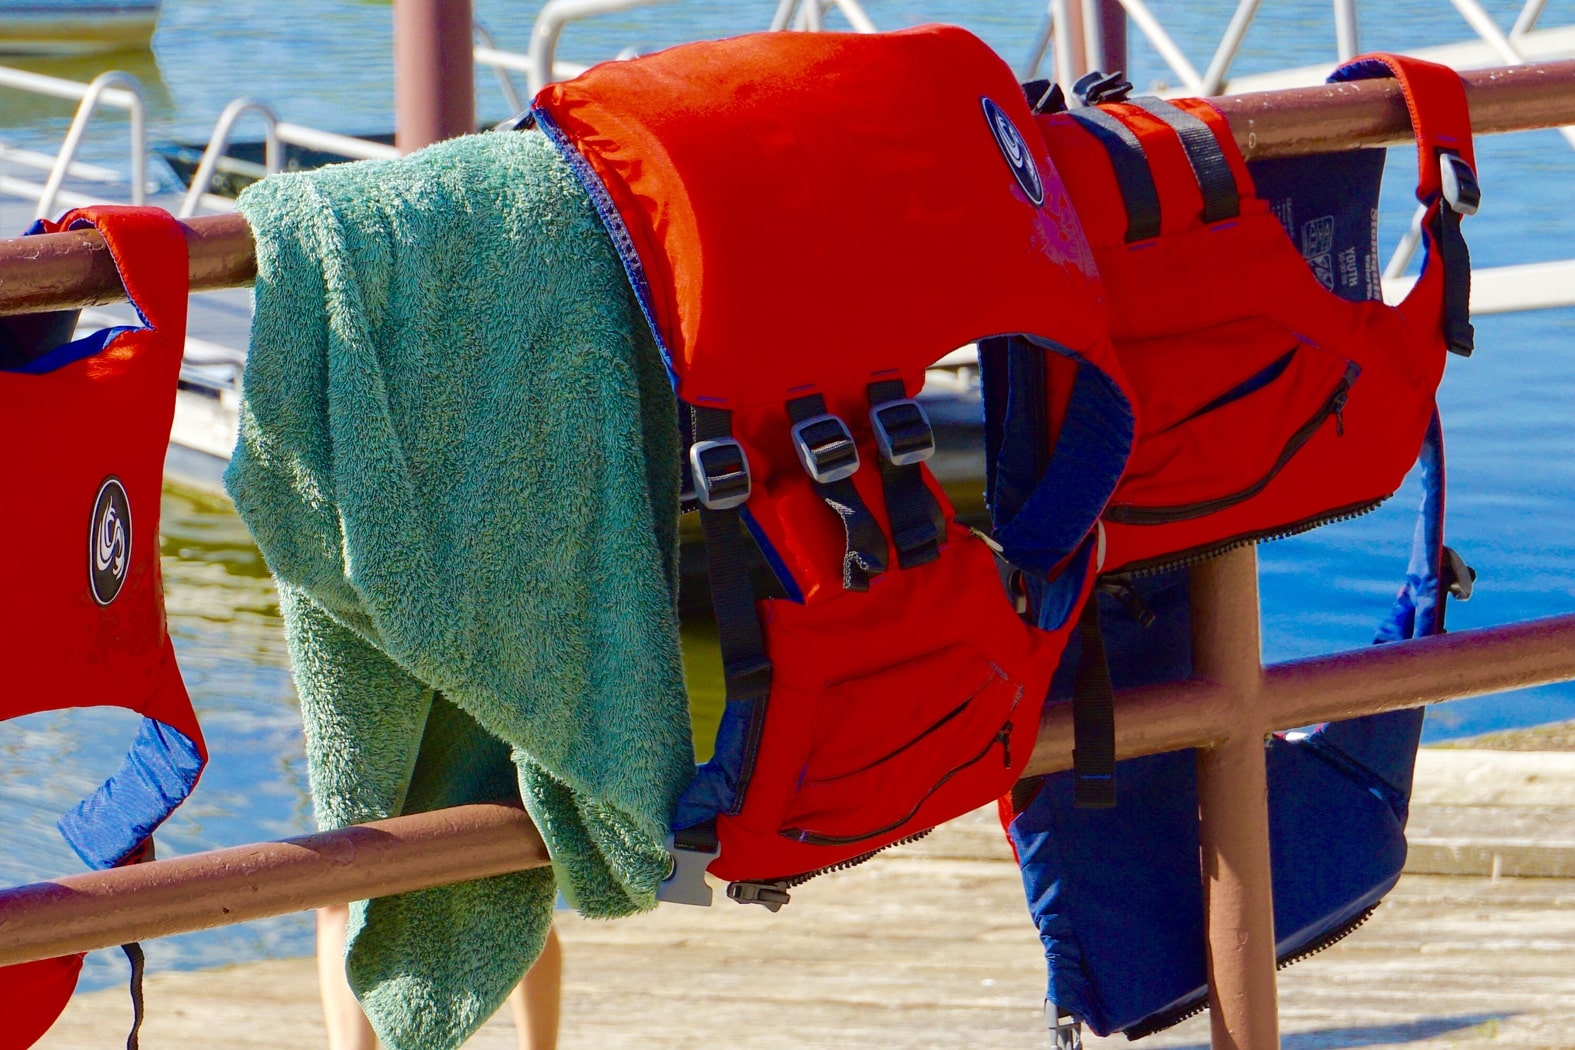 Life Jacket Types for Adults